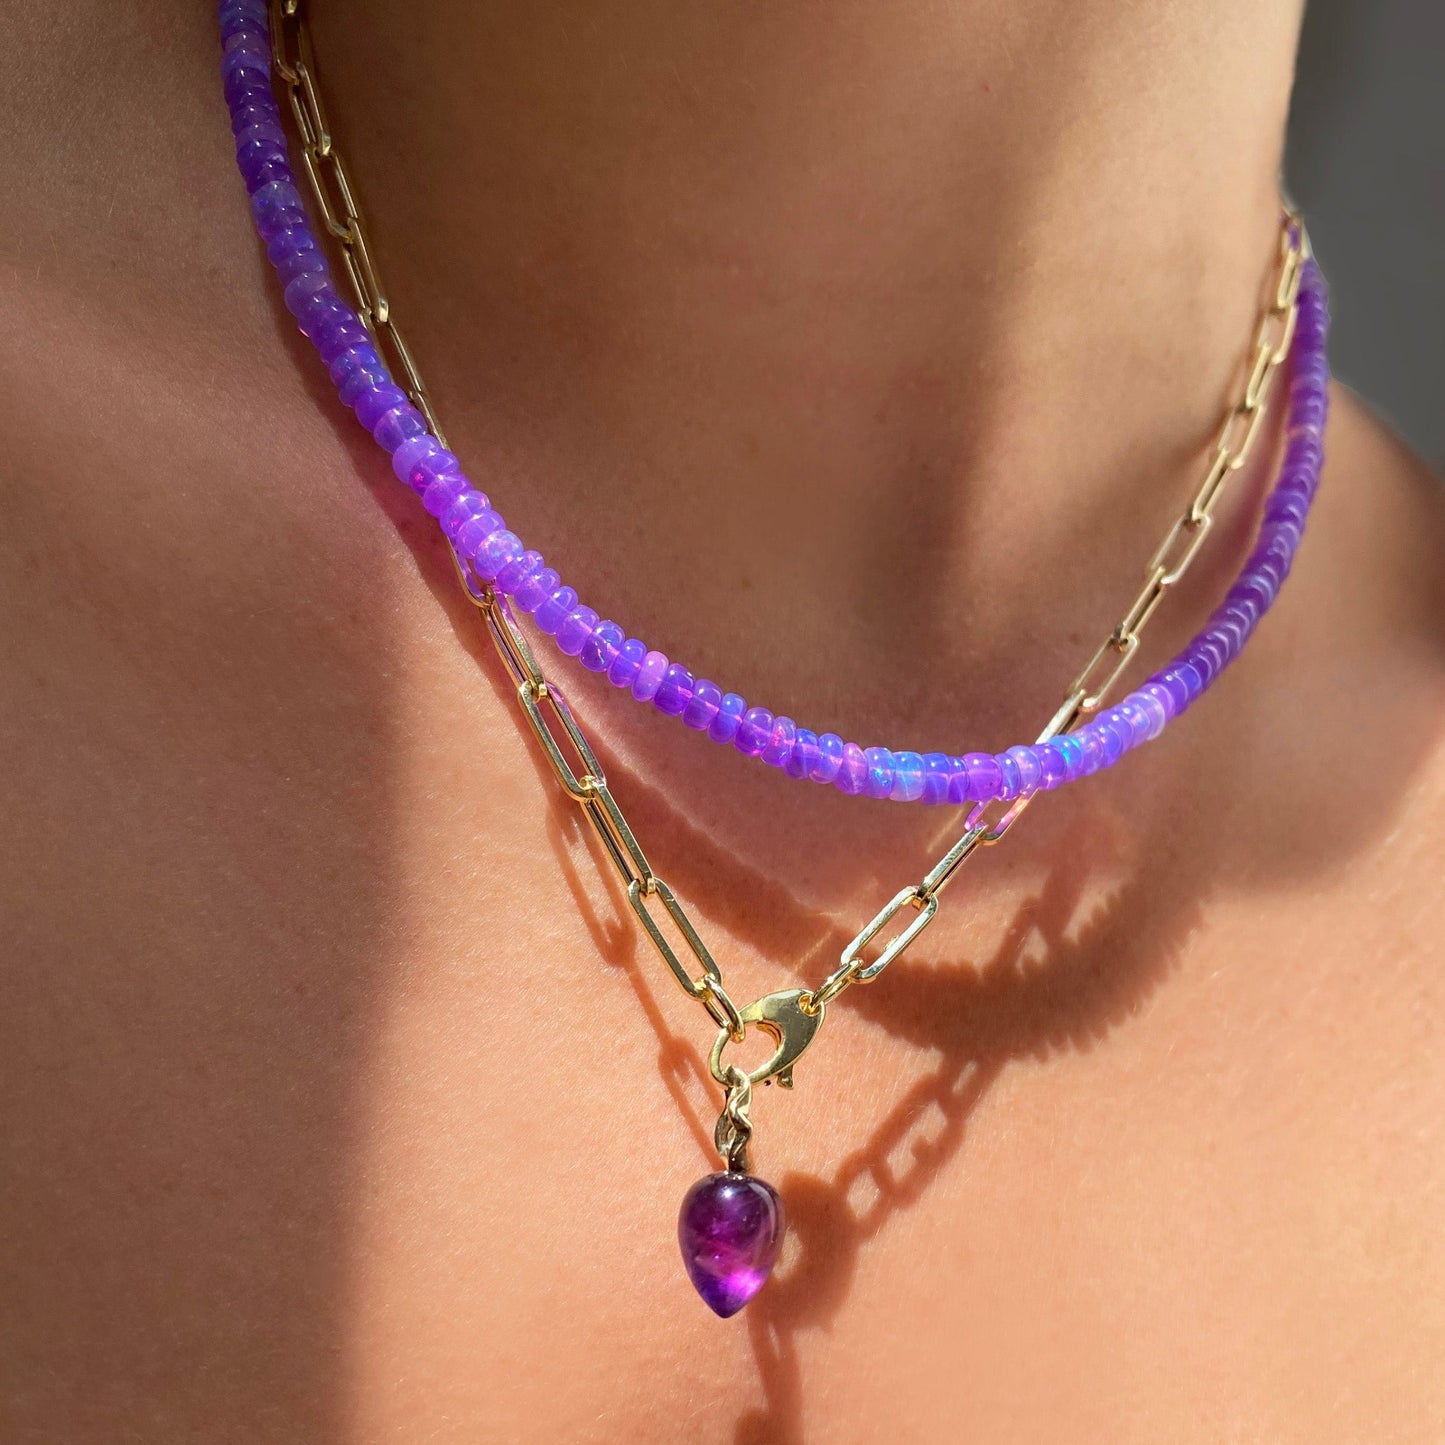 Amethyst acorn drop charm. Styled on a neck hanging from the lobster clasp of a chunky paperclip chain necklace